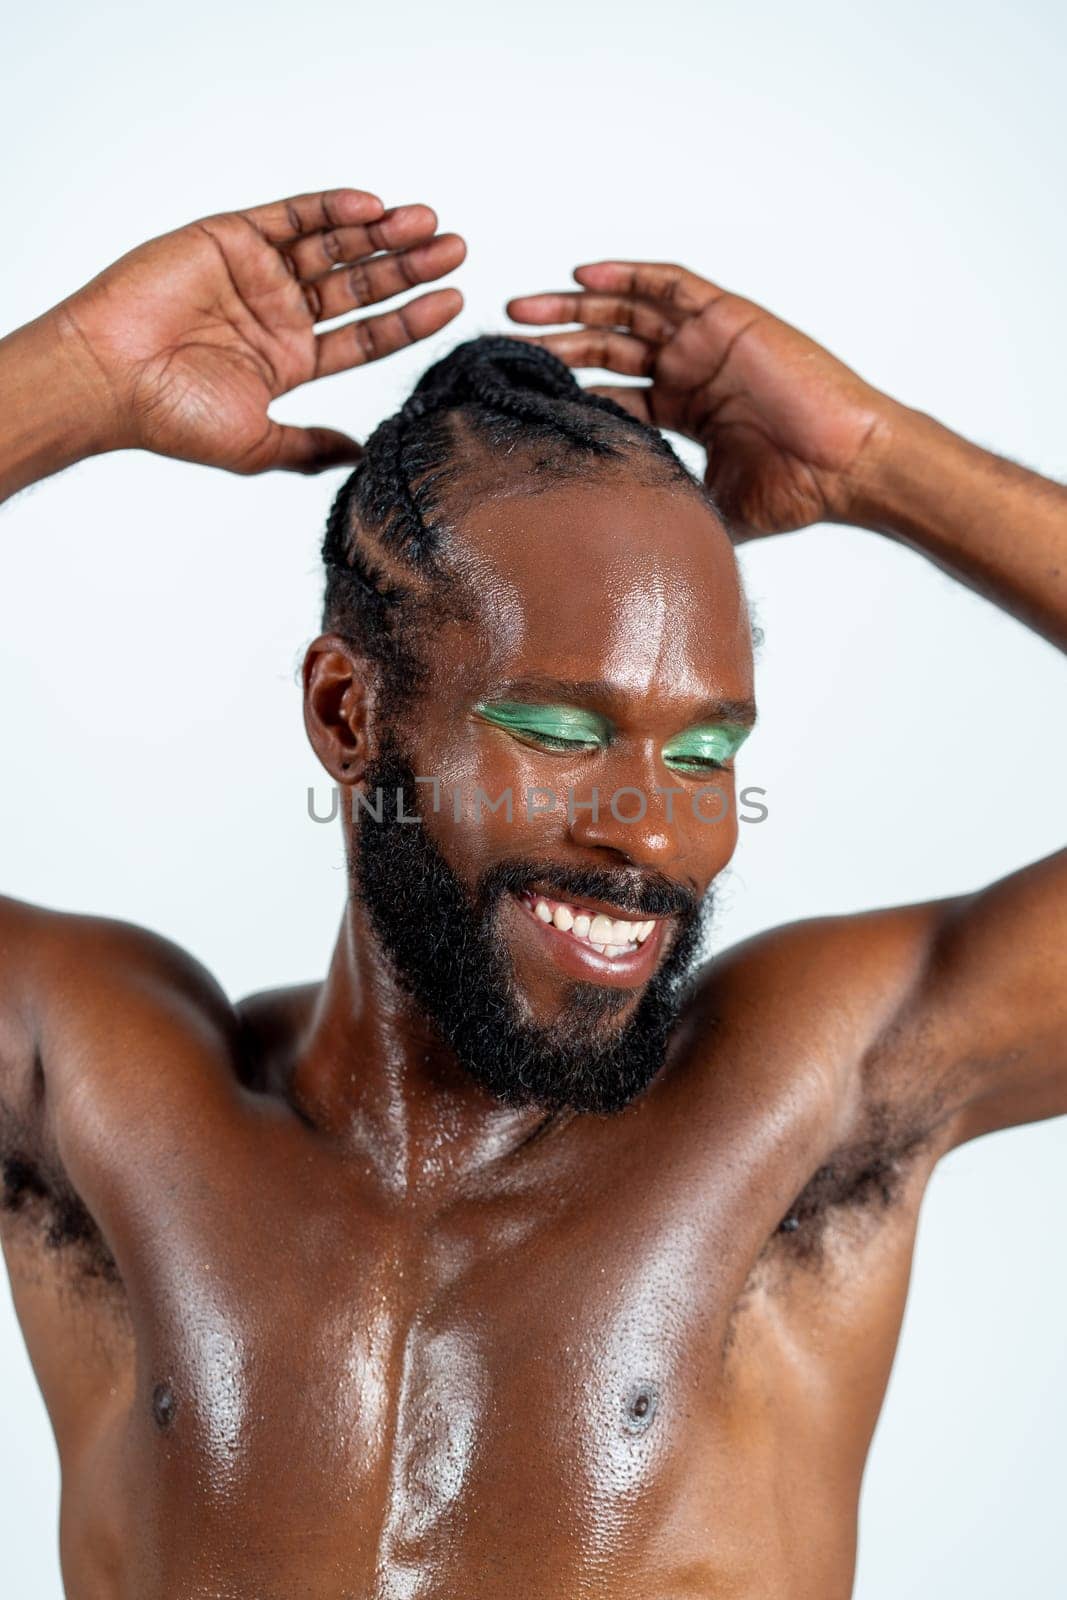 Portrait of shirtless muscular African American gay man with green eyeshadow. Confident bearded man smiling with hands raised on white background. Happy gay with bright makeup.